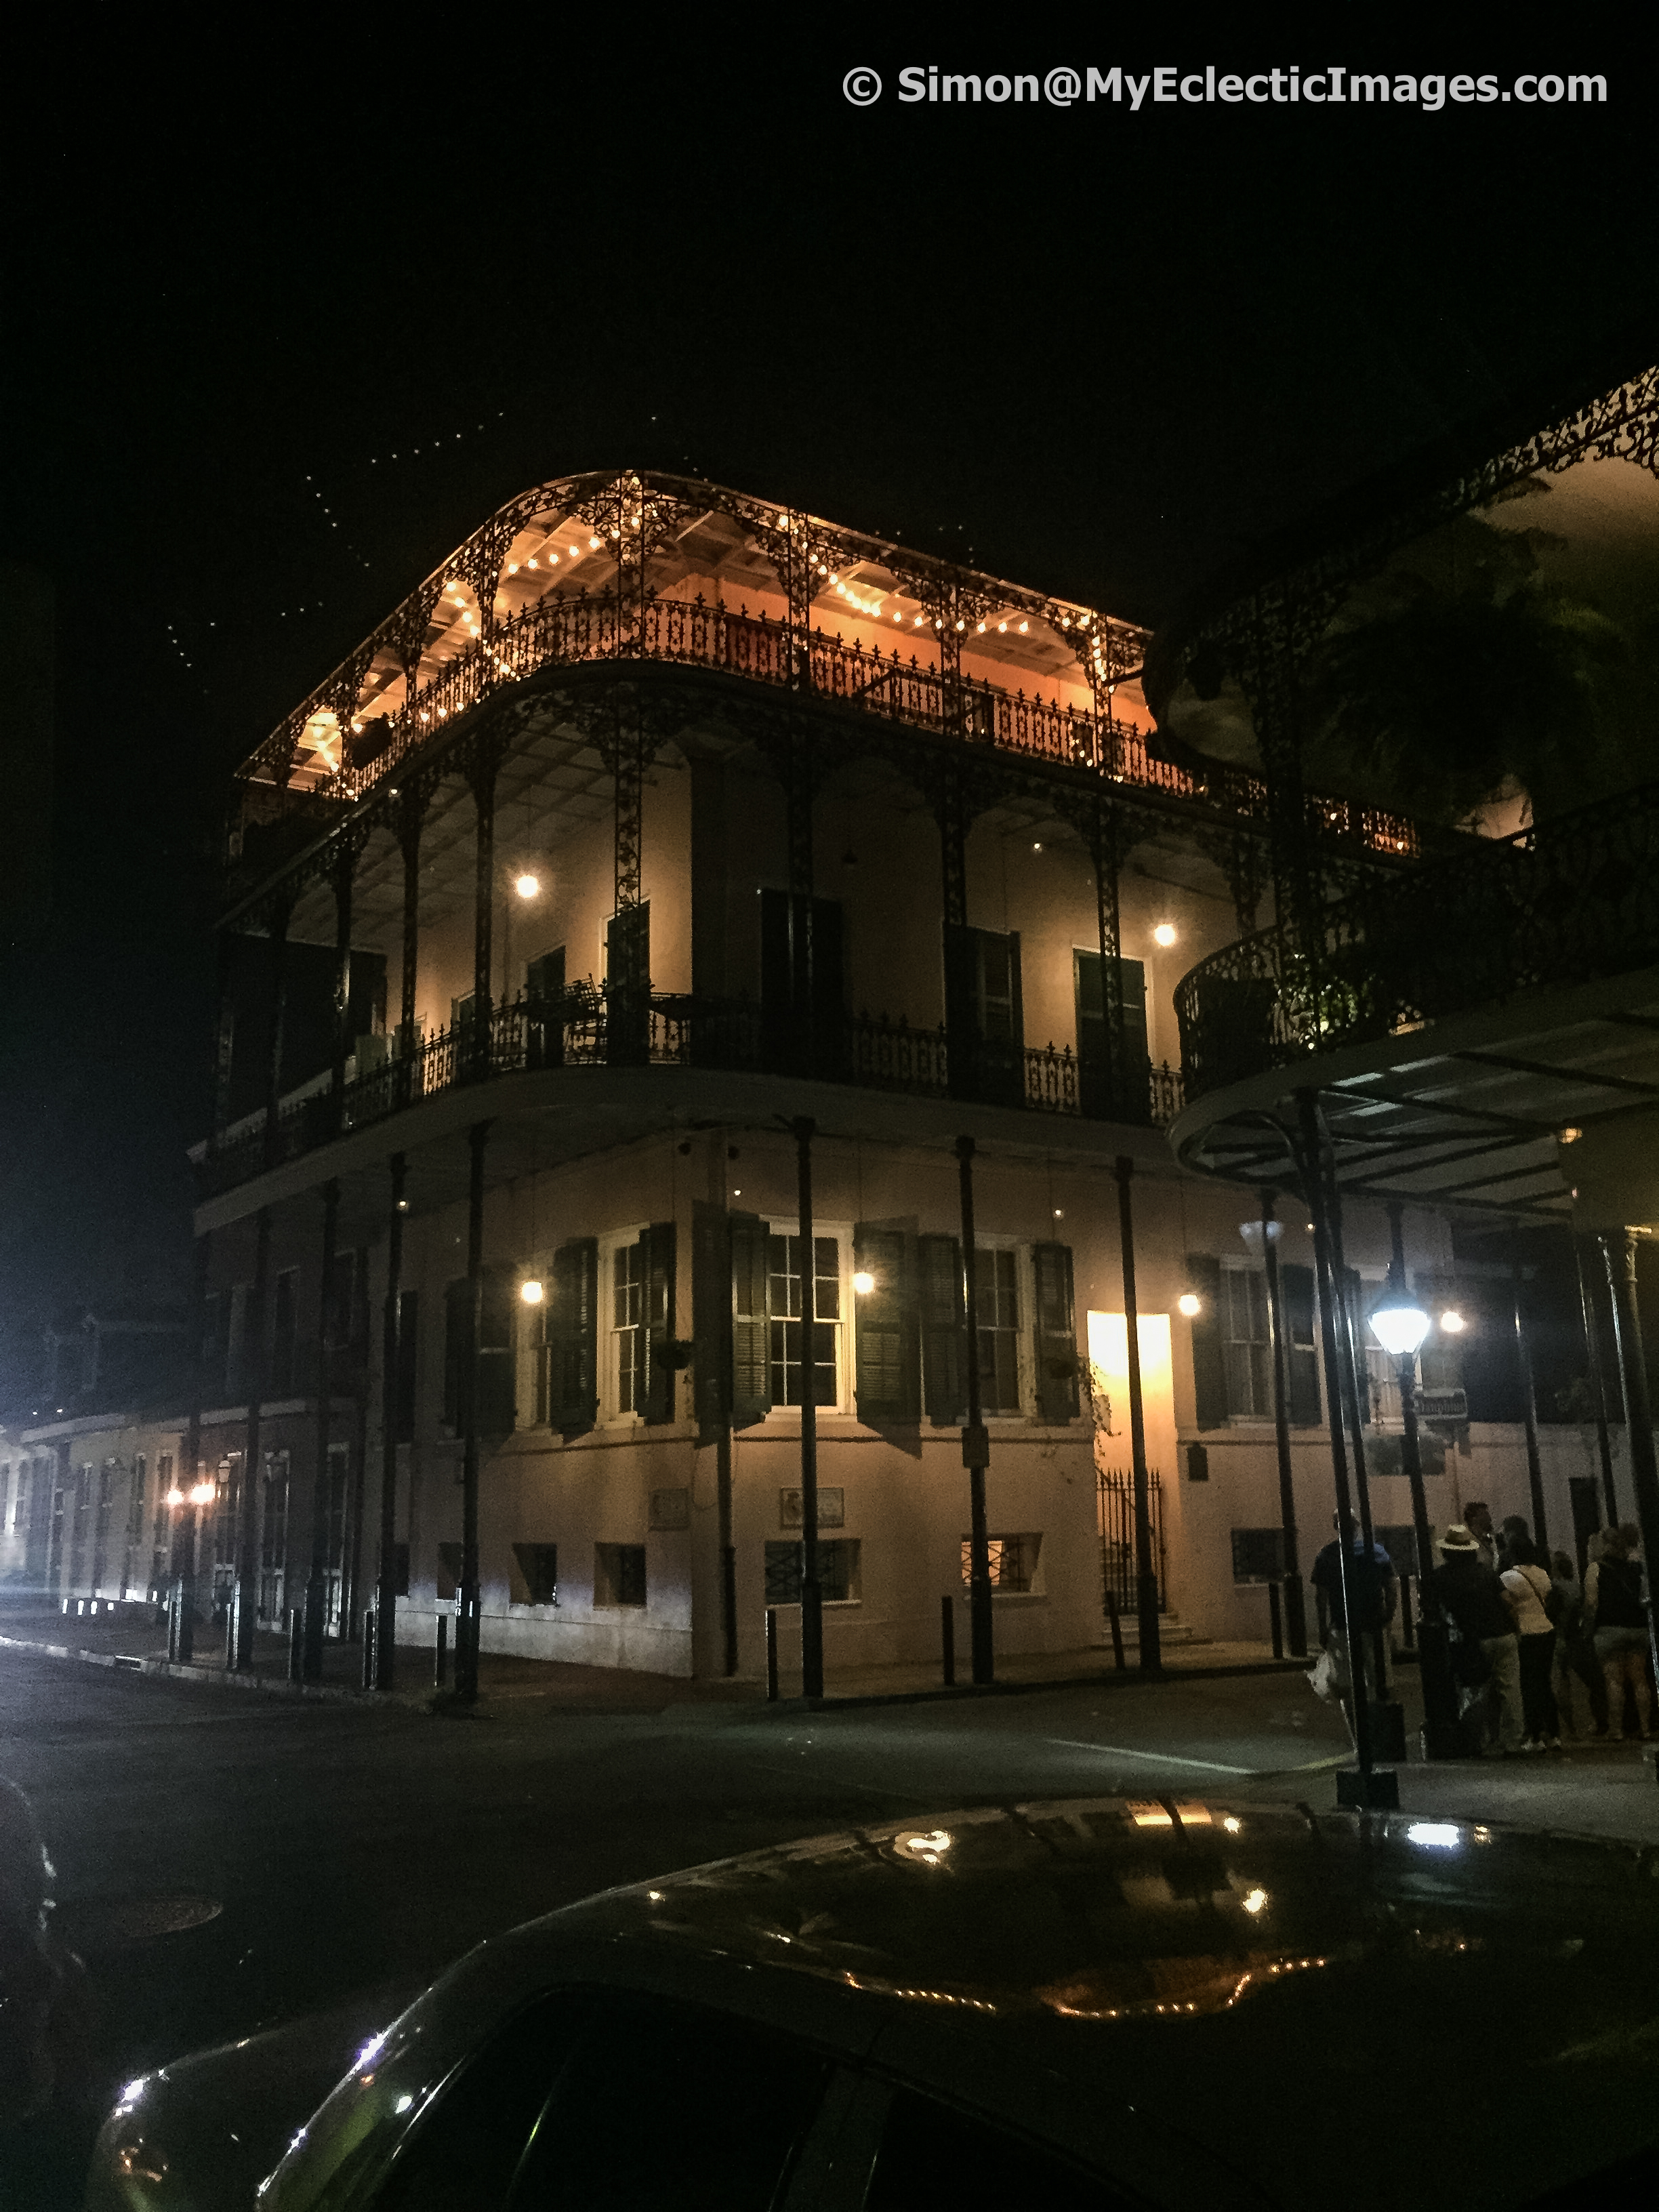 The LaLaurie Mansion in Haunted New Orleans